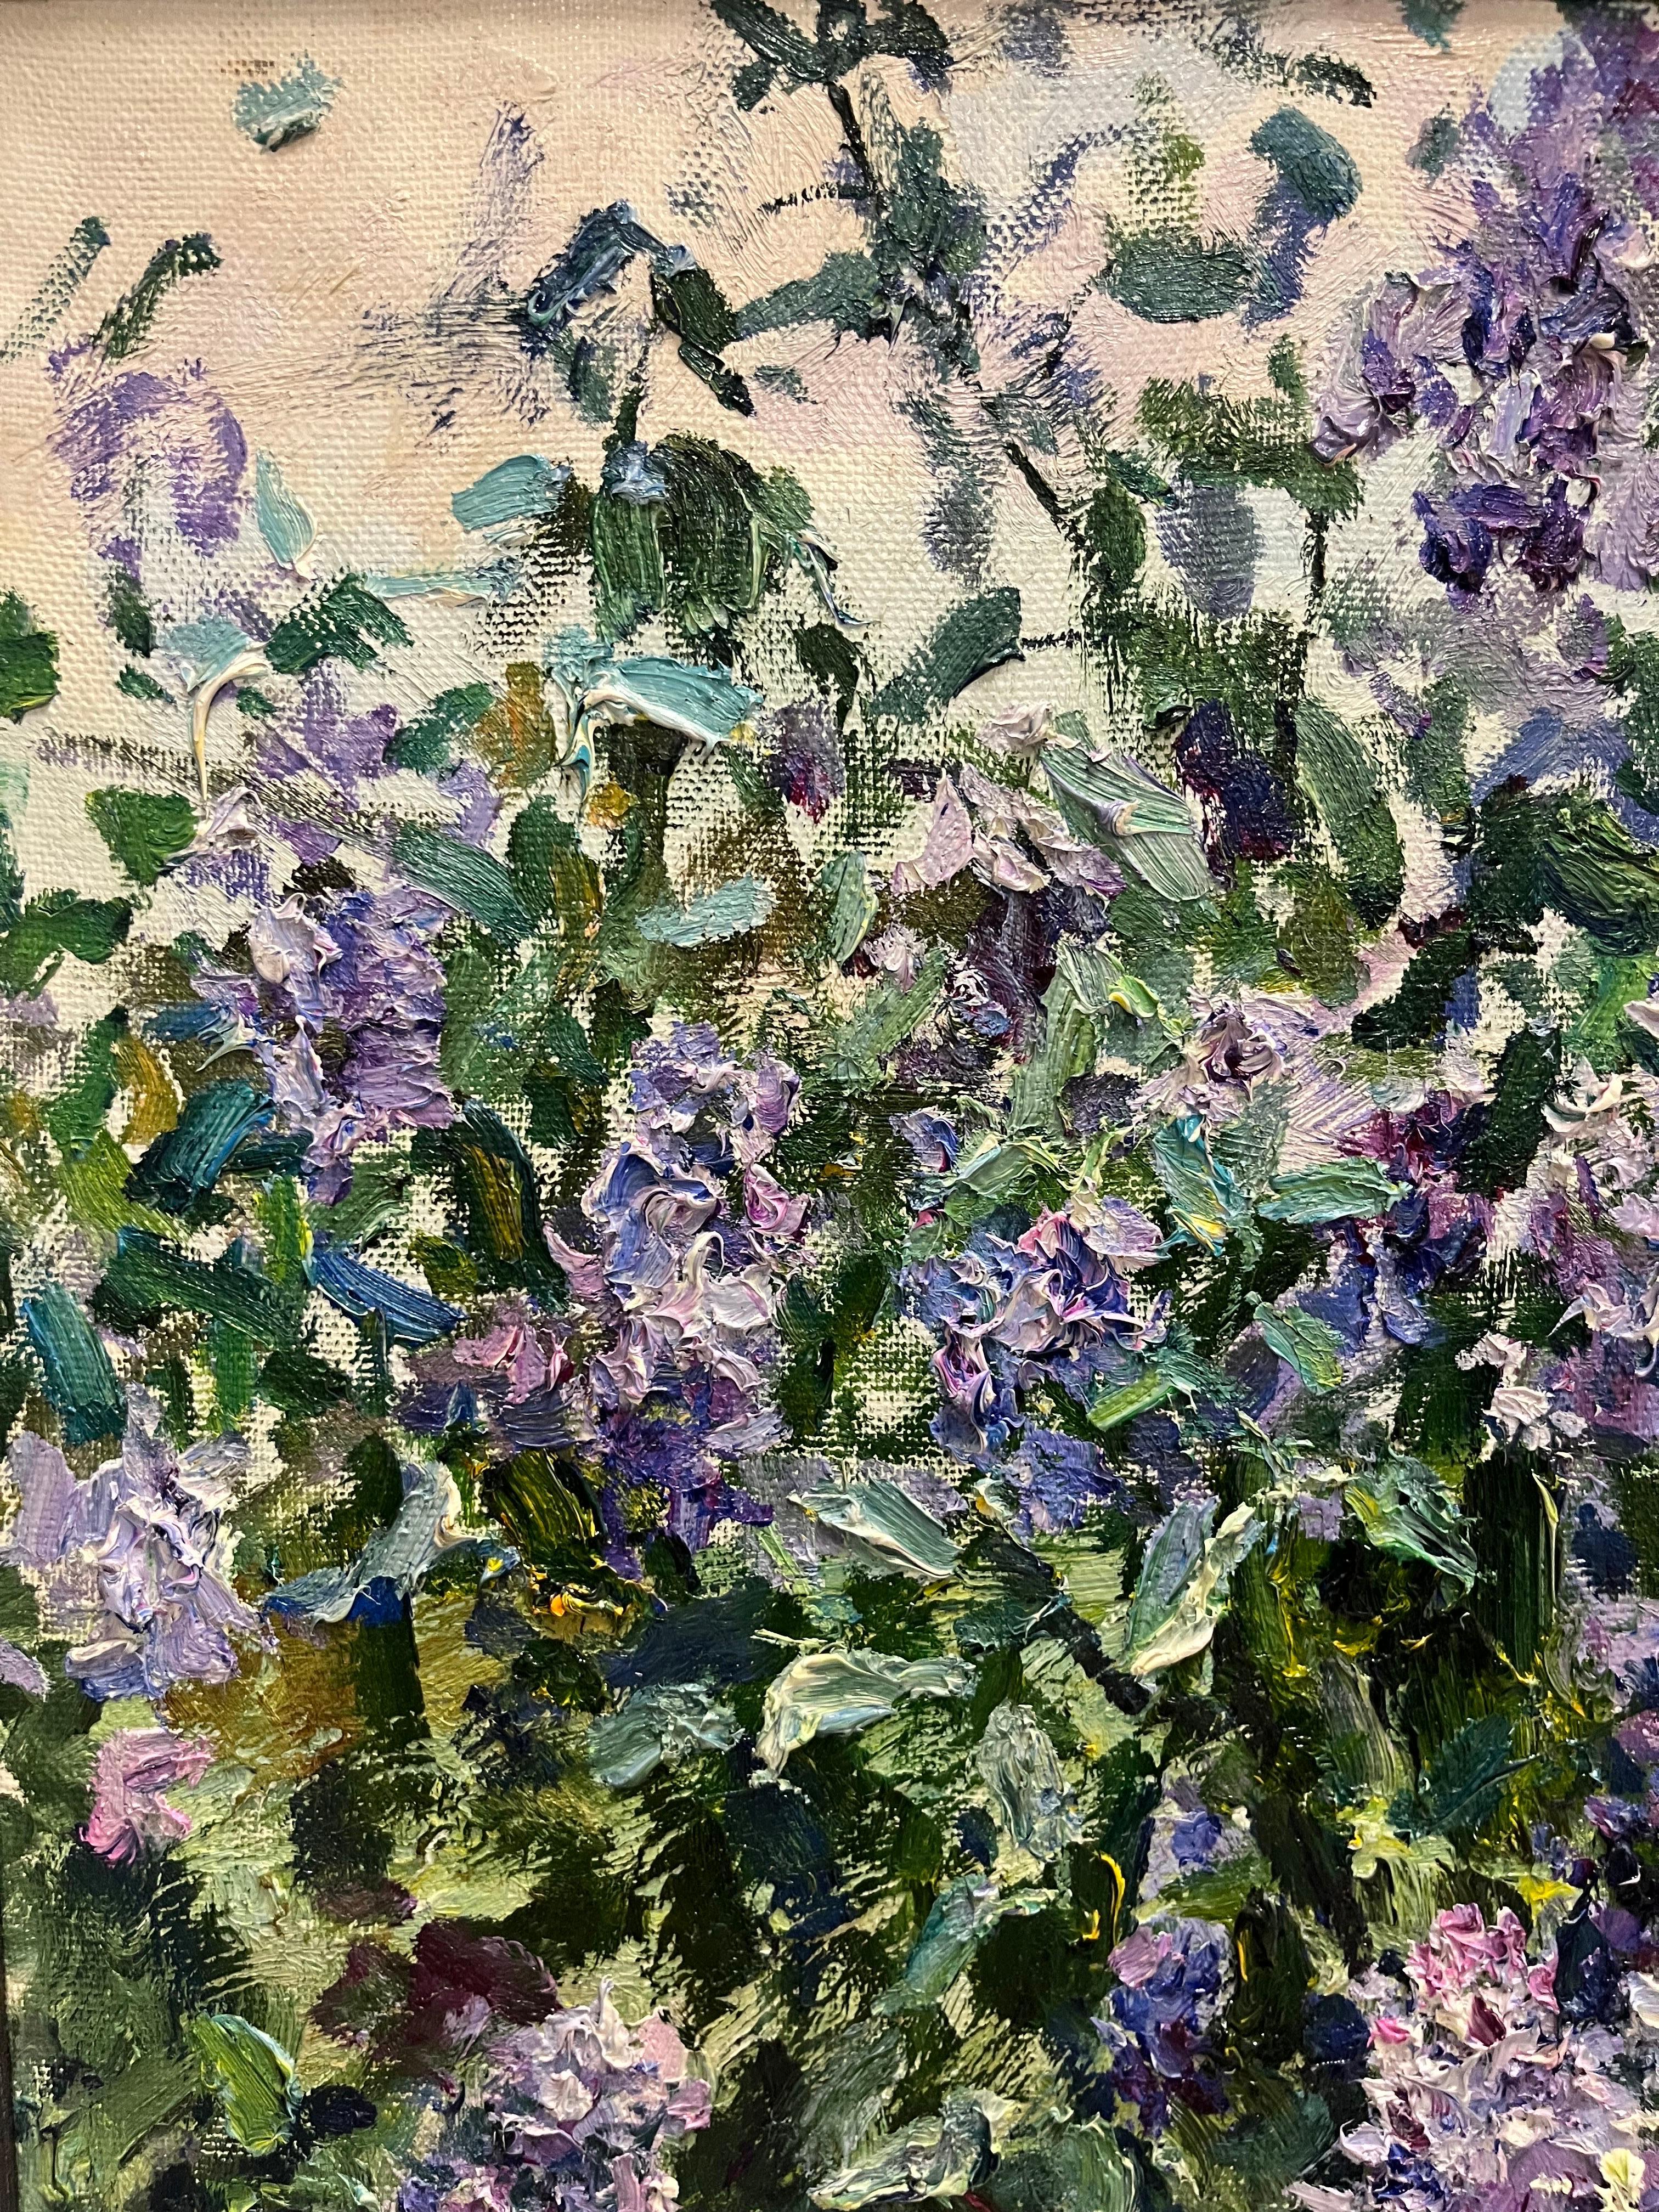 Flowers,Garden ,Lilac ,Purple , white,Spring


Georgij MOROZ (Dneprodzerzinsk, Ucraina, 1937 - St. Petersburg, 2015)
MUSEUMS
Moscow, Tret’jakov Gallery
Moscow, USSR Artists Collection
Moscow, The Ministry of Culture Collection
St. Petersburg,